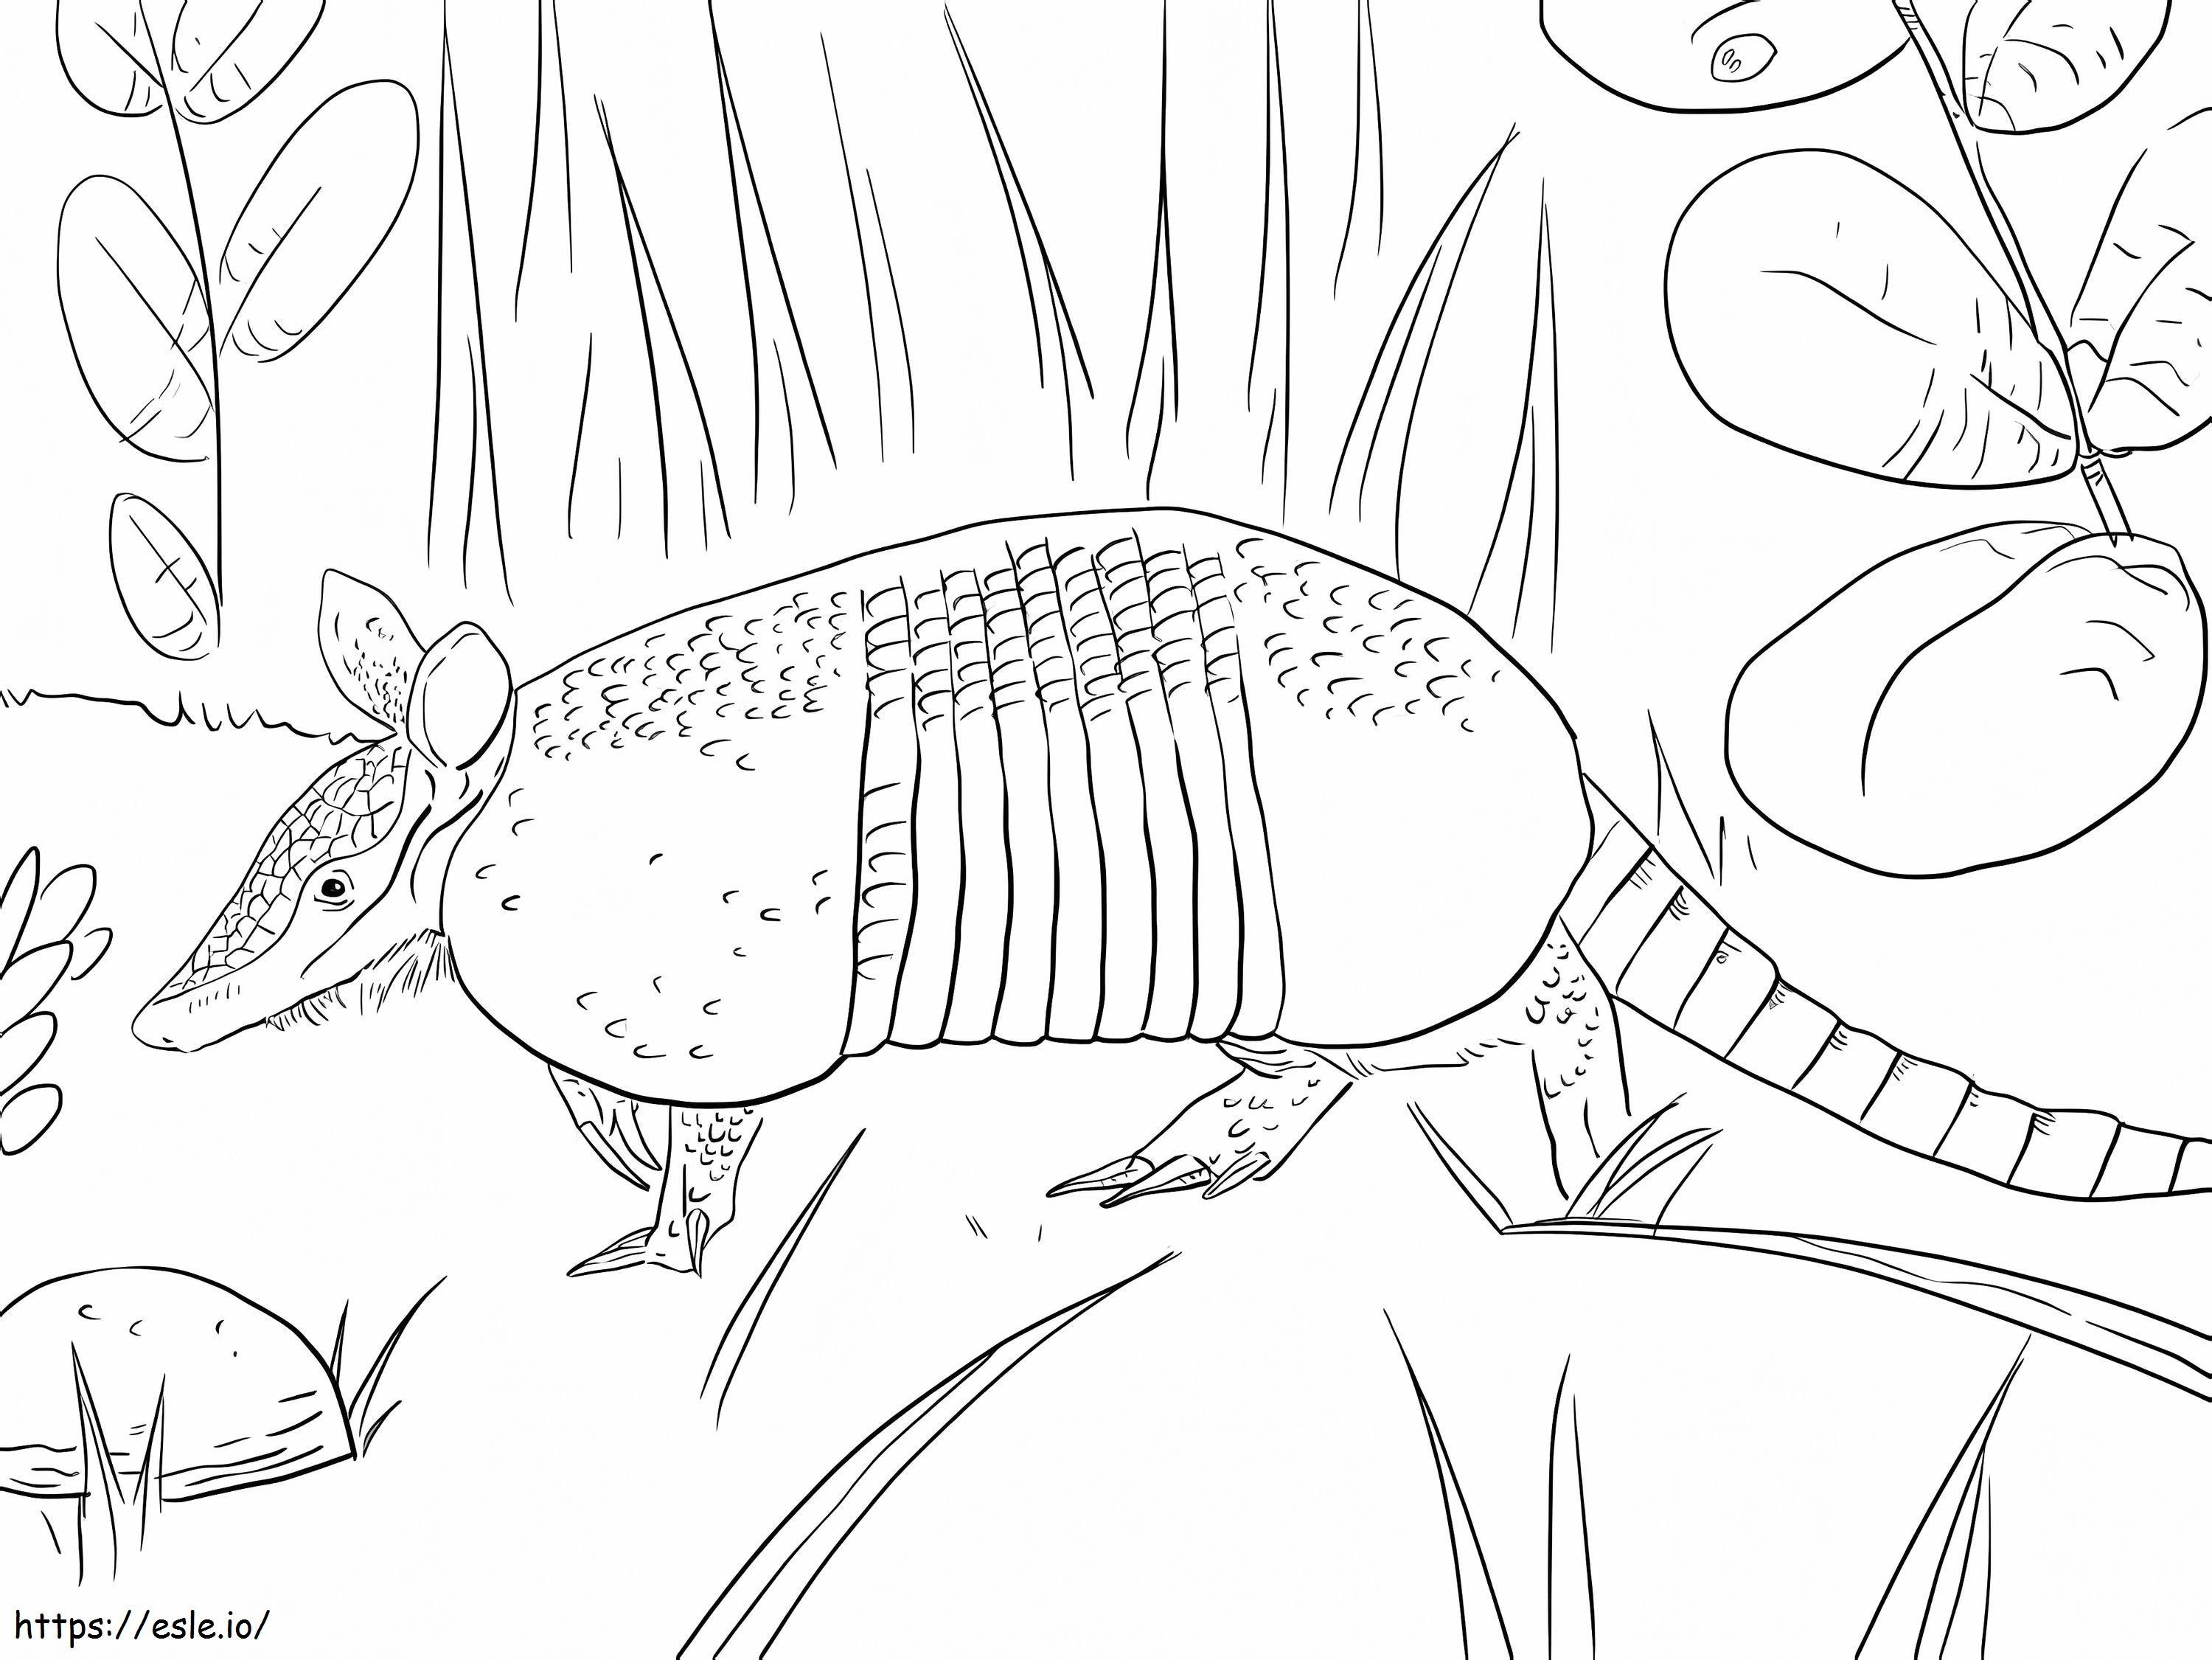 Nine Banded Armadillo coloring page